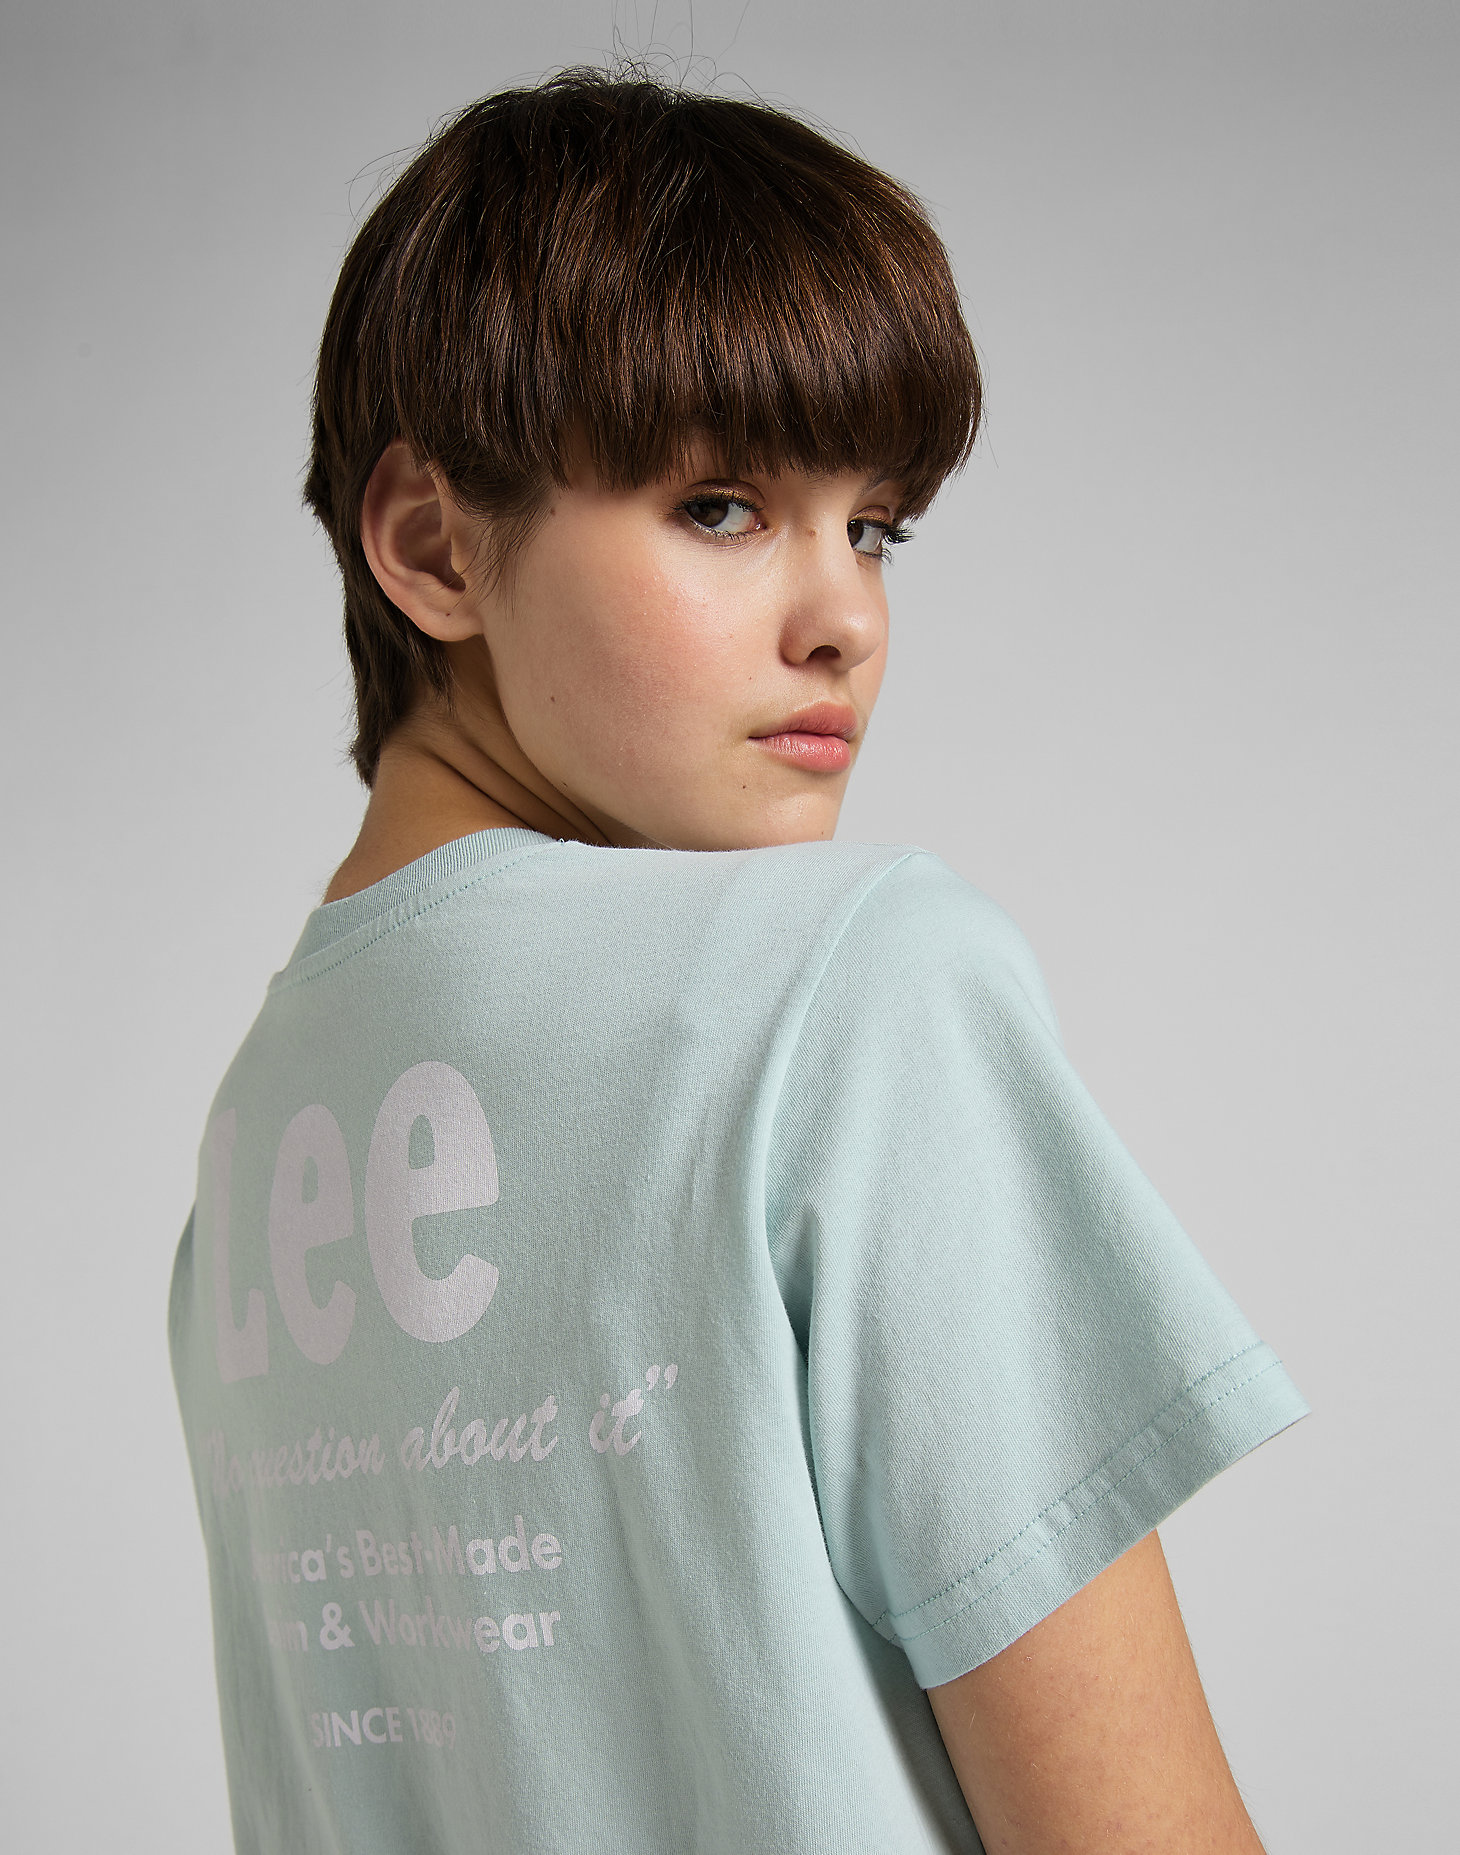 Graphic Tee in Sea Green alternative view 4